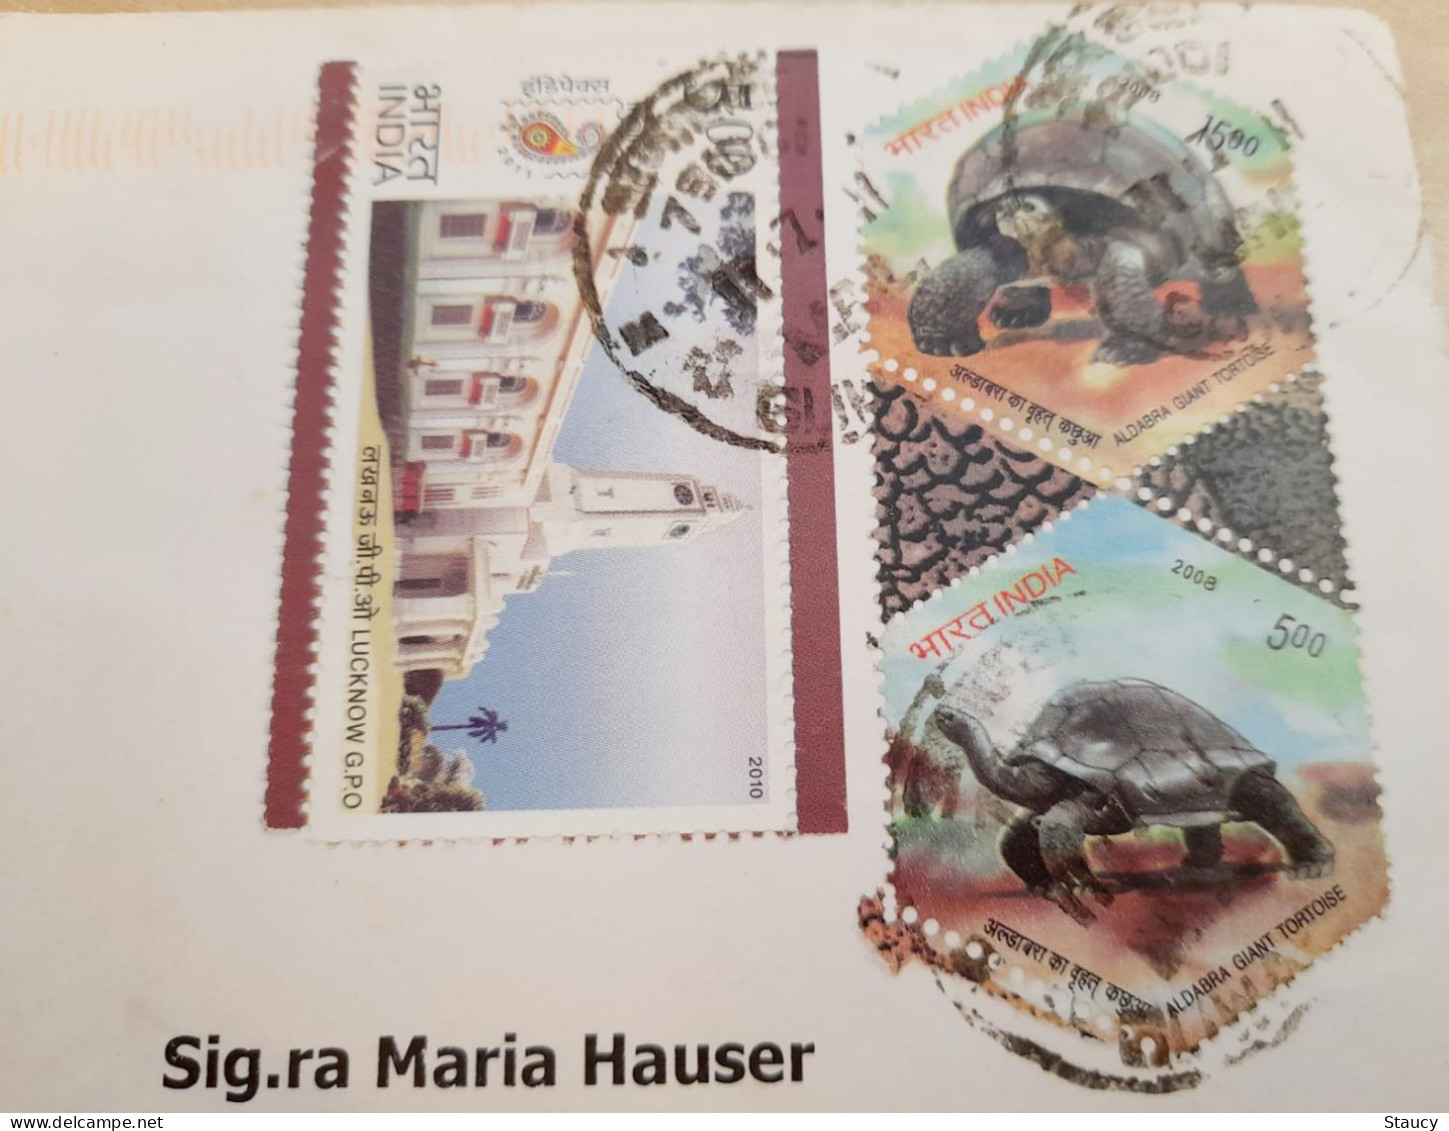 INDIA,2011,RETURN TO SENDER LABEL,AIR MAIL COVER TO SWITZERLAND,3 STAMPS,TORTOISE,POSTAL HERITAGE, GUWAHATI - Airmail